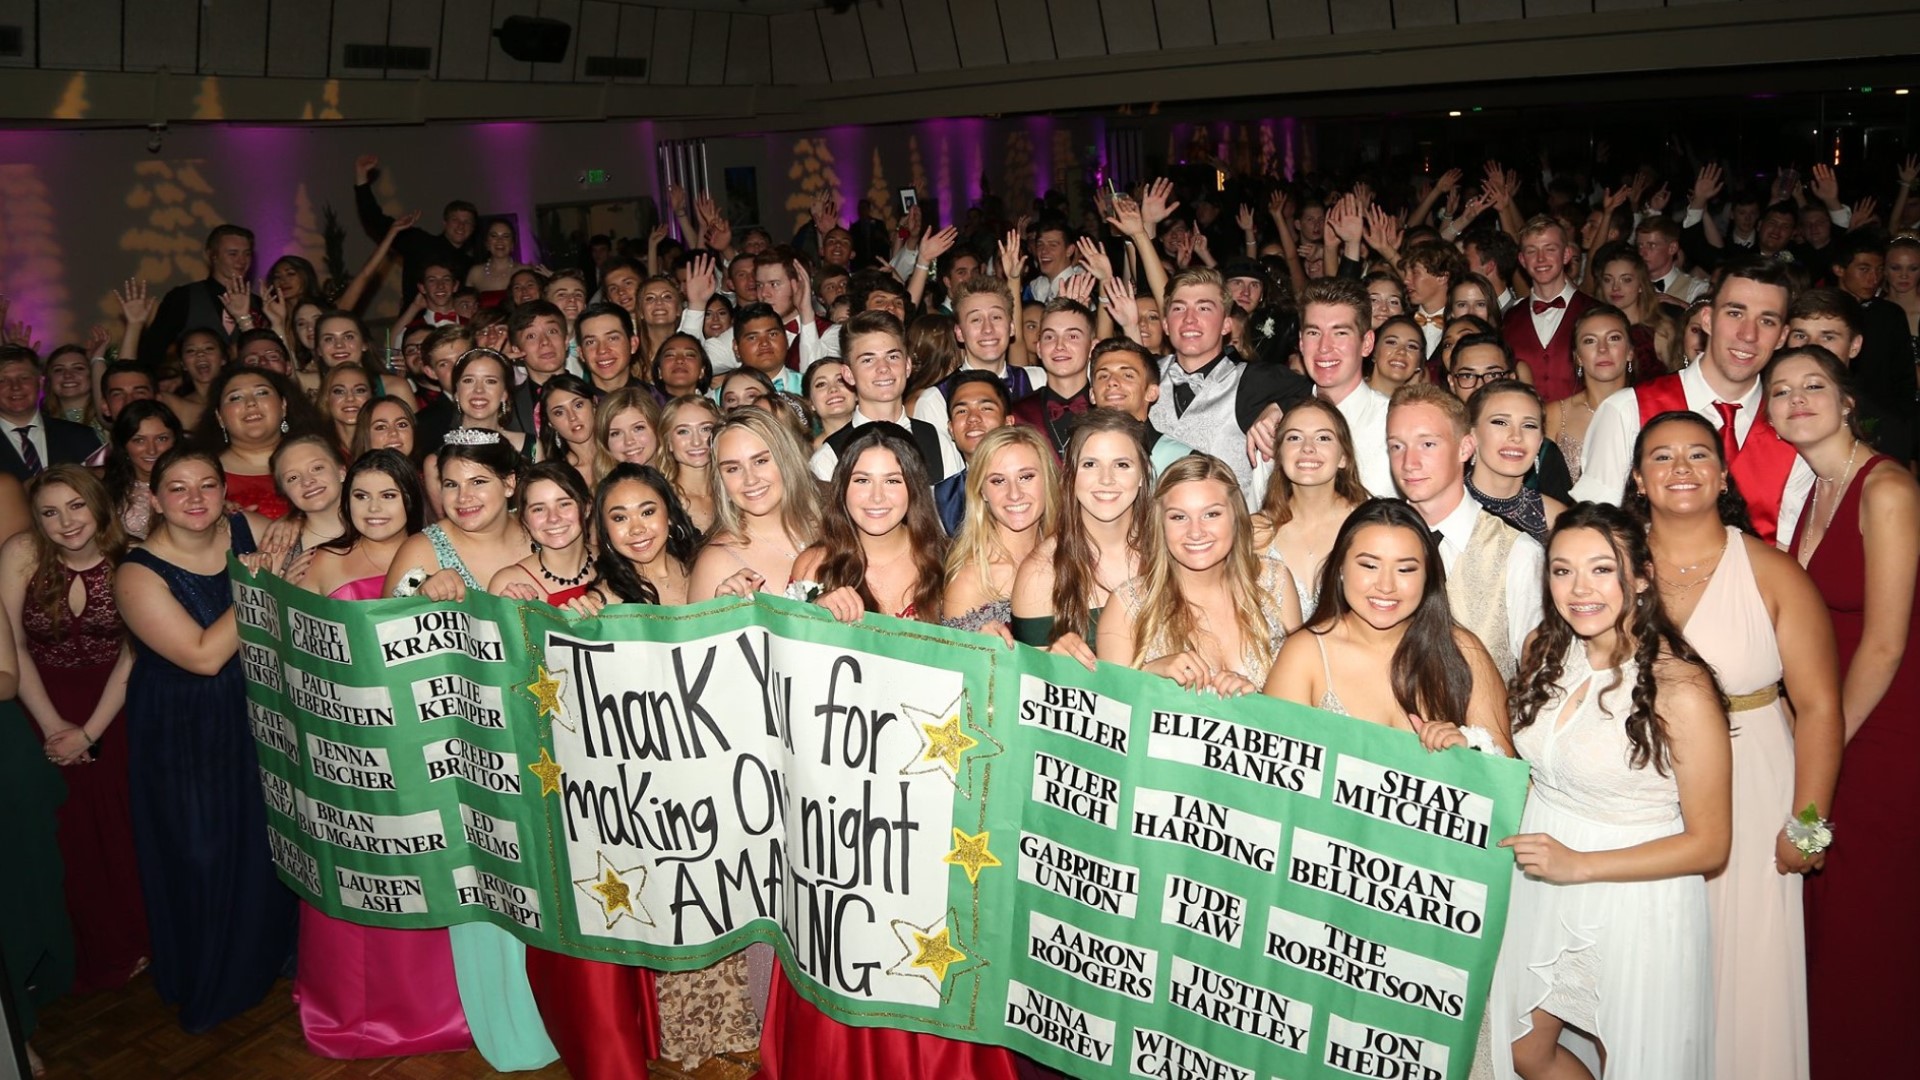 Melanie Little made prom night even more special for the teenagers of Paradise. Enlisting the help of more than 30 celebrities, she made a video message the students will always remember.